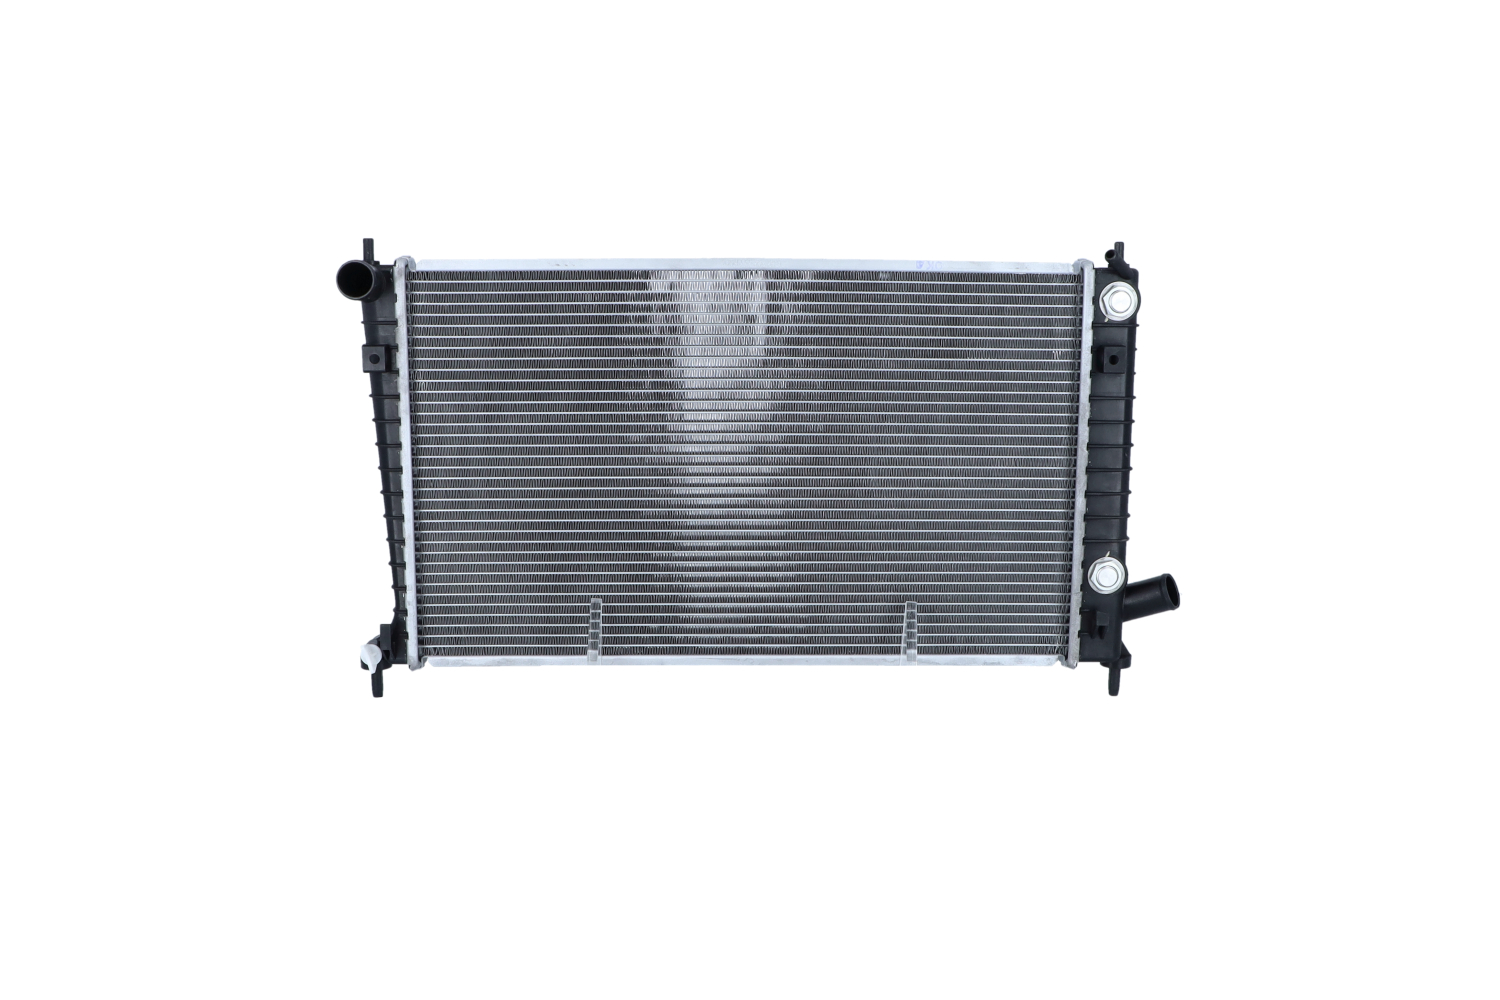 NRF 53804 Engine radiator Aluminium, 607 x 374 x 27 mm, with mounting parts, Brazed cooling fins